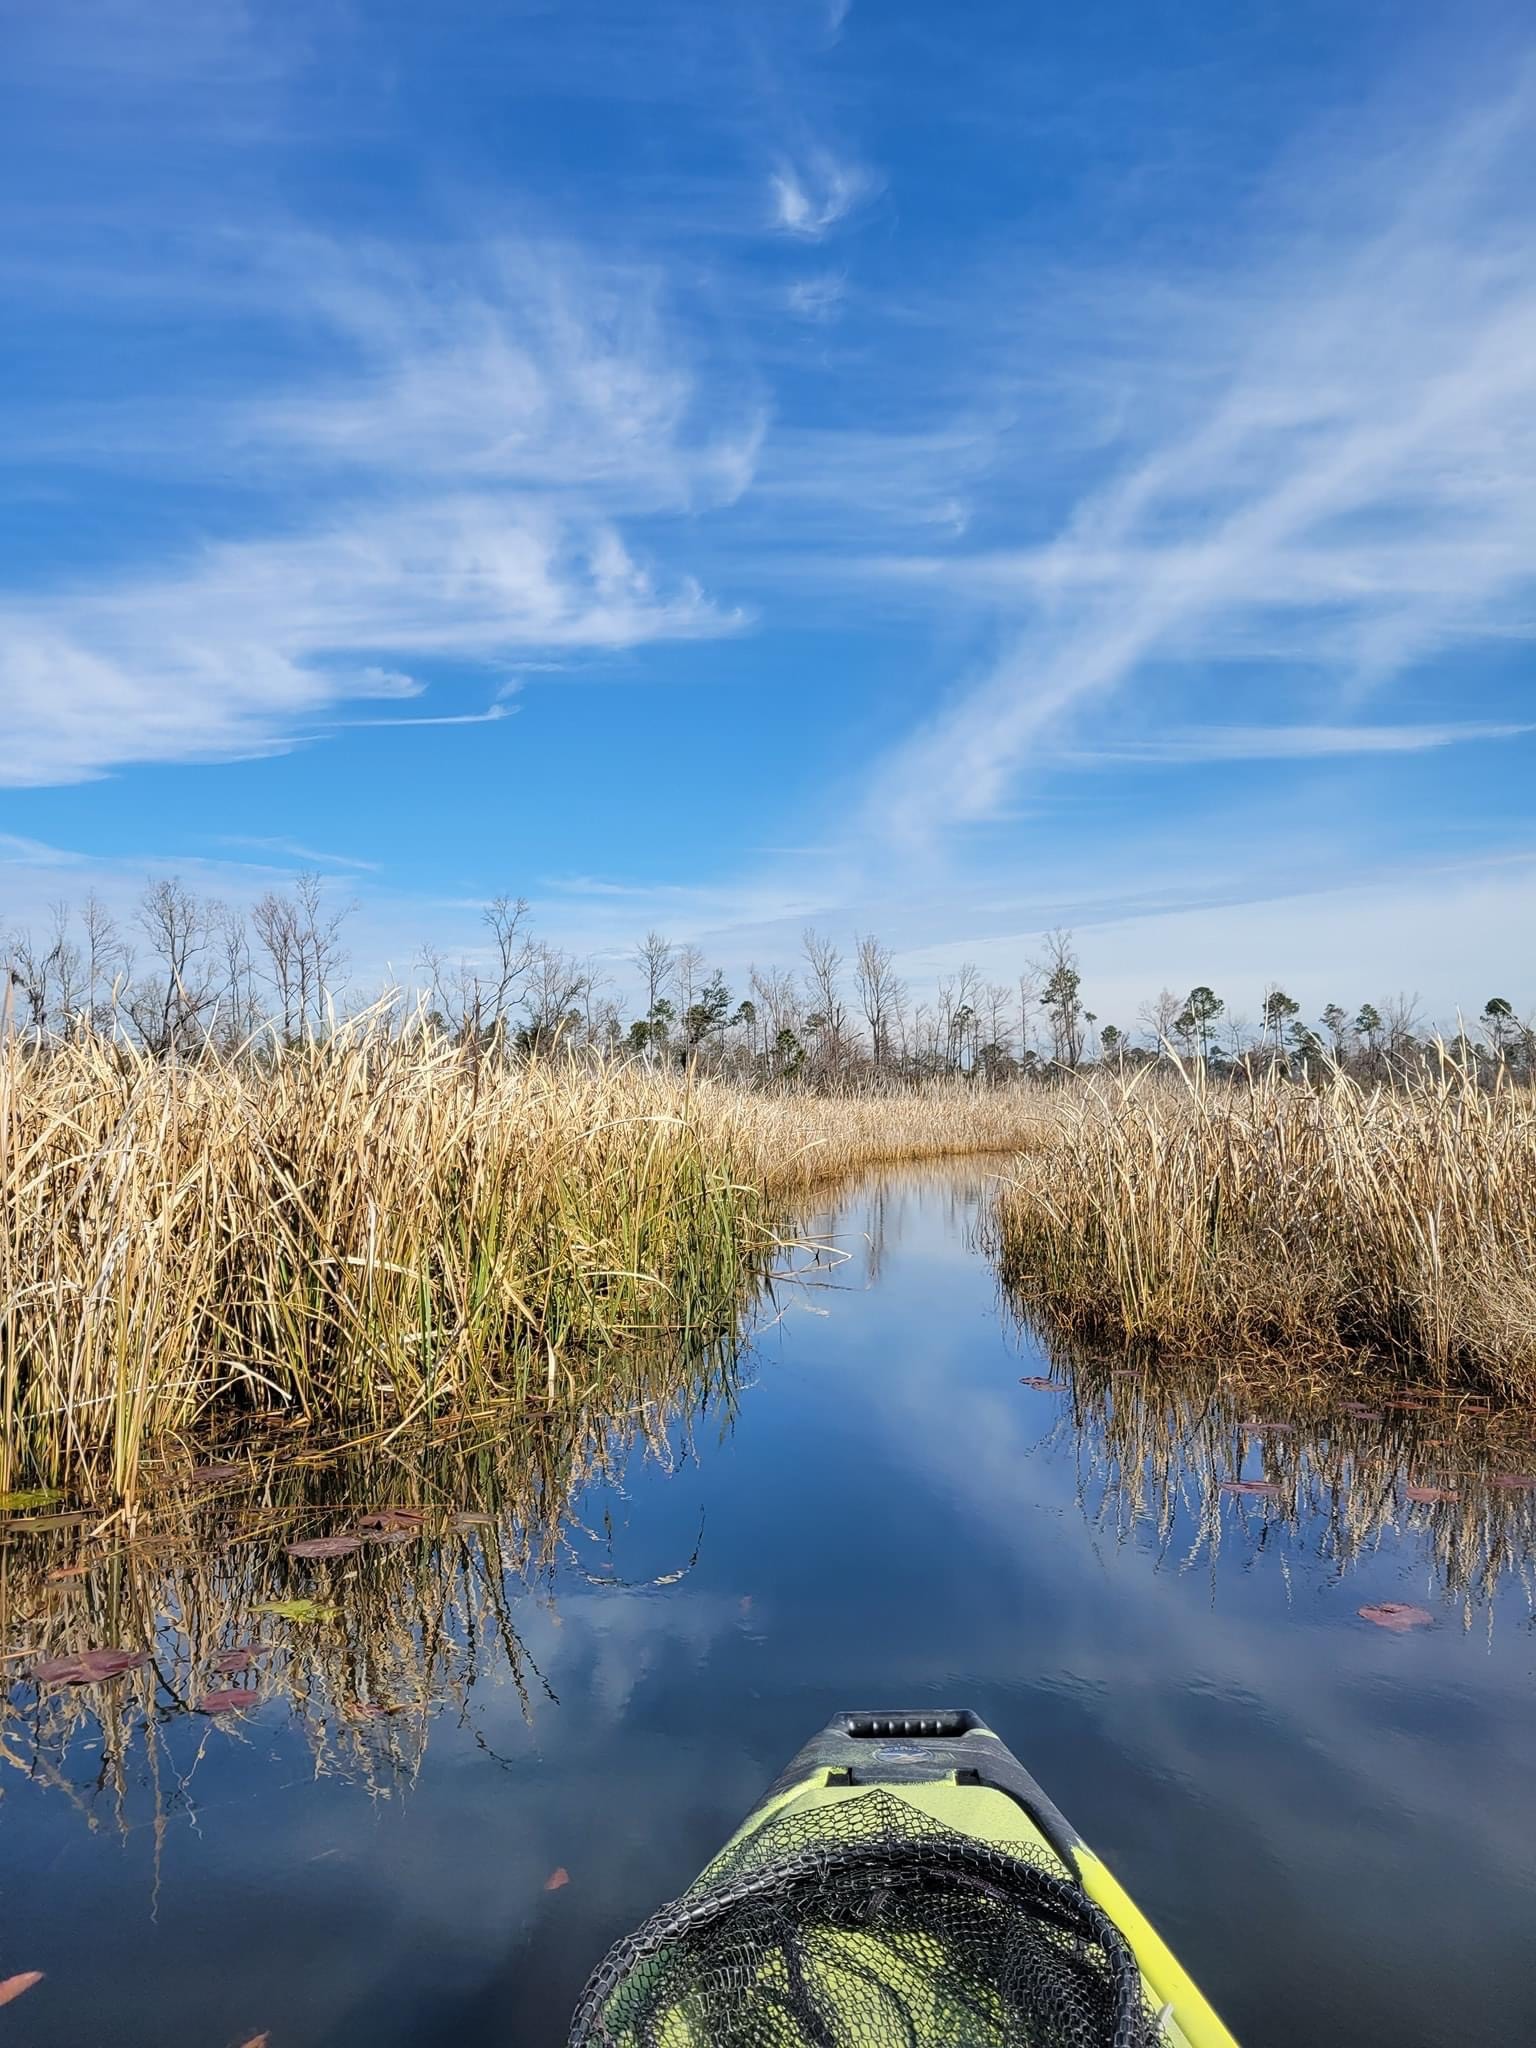 Bainbridge is home to the Flint River leading into Lake Seminole, a world renowned fishery perfect for kayak fishing.